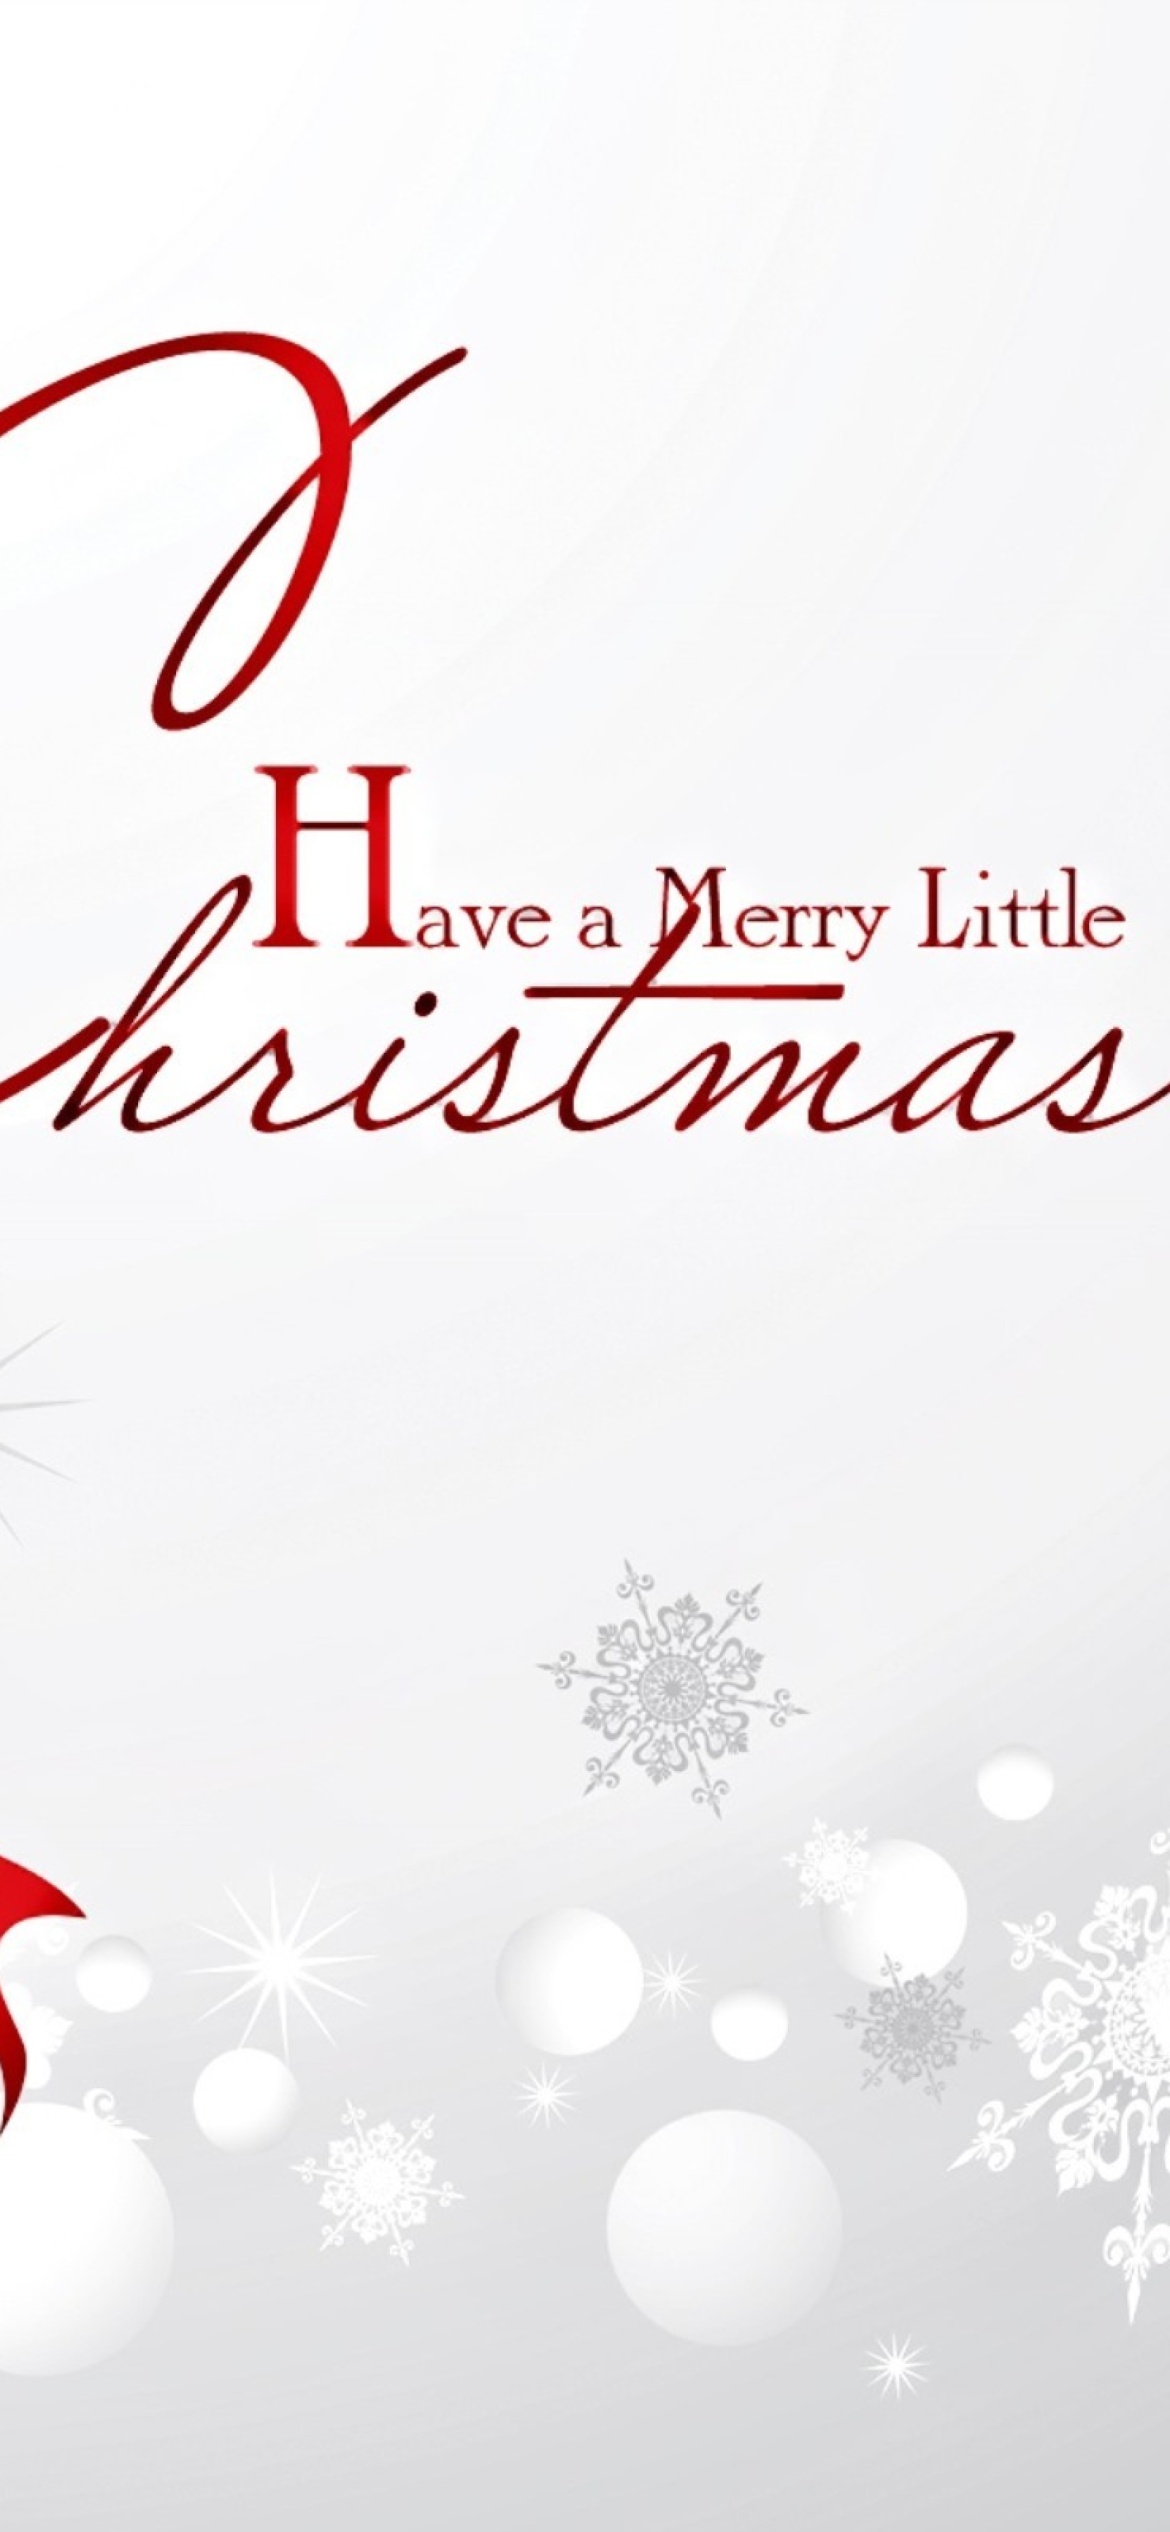 Have A Little Christmas wallpaper 1170x2532